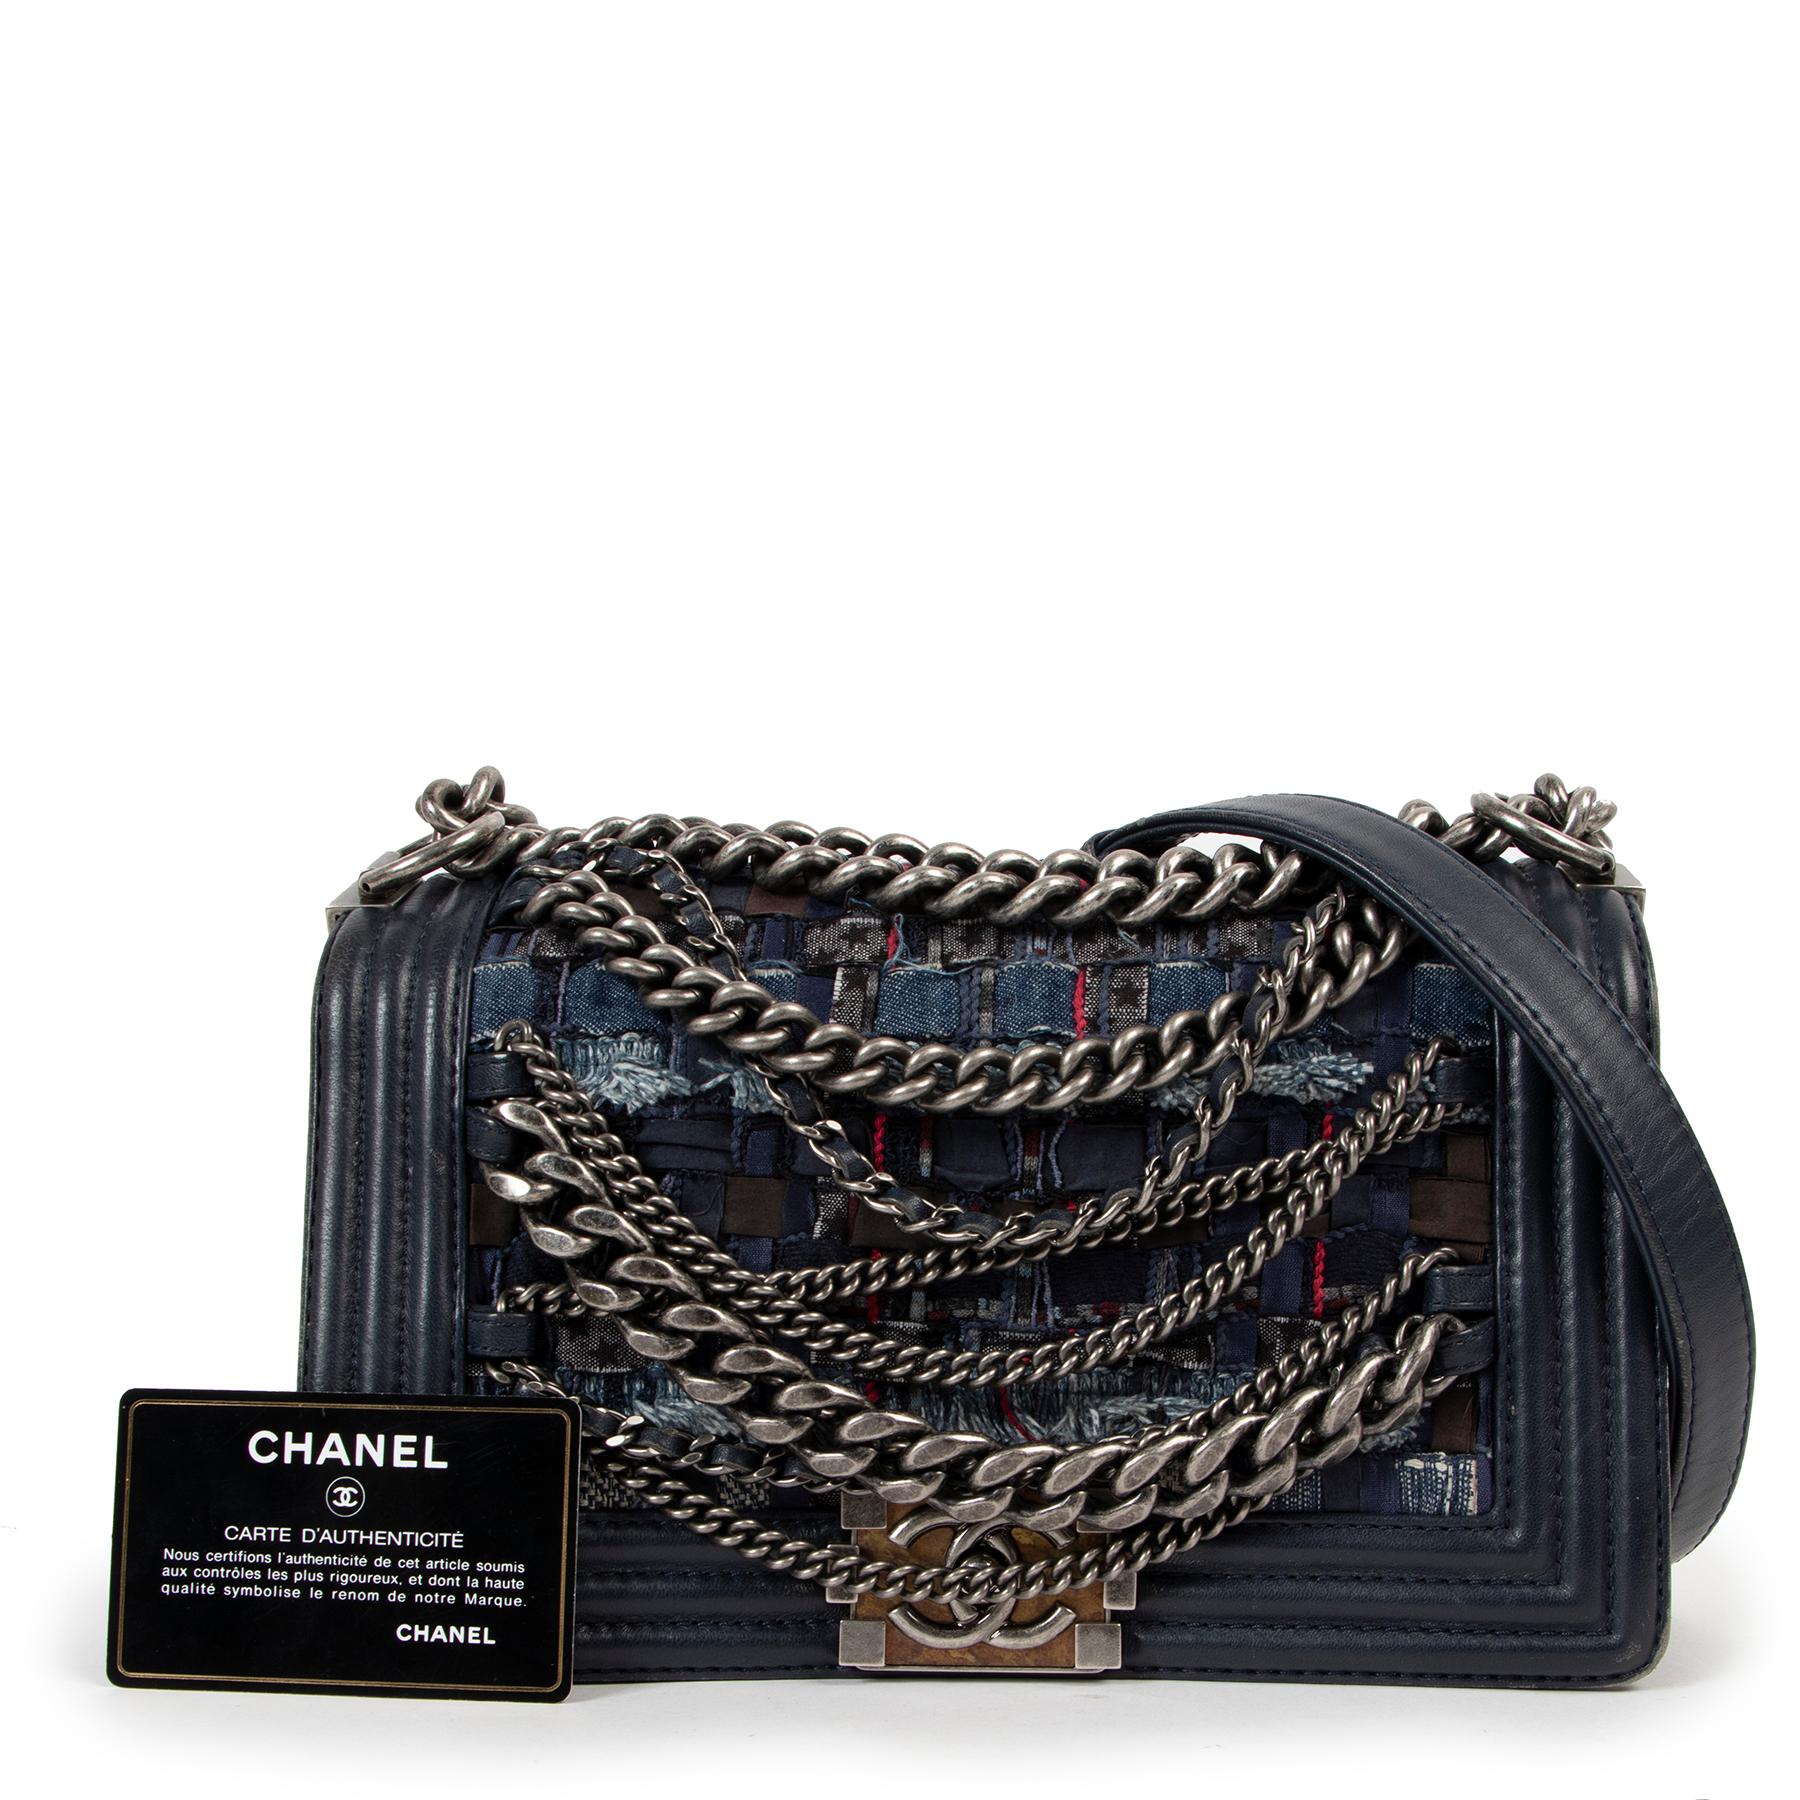 Chanel Enchained Blue Tweed Medium Boy Bag

We can't get over this Chanel Boy Bag... What a real eye-catcher! The combination of its edgyness and sophistication makes this bag an unmissable piece in your wardrobe. The exterior is crafted from